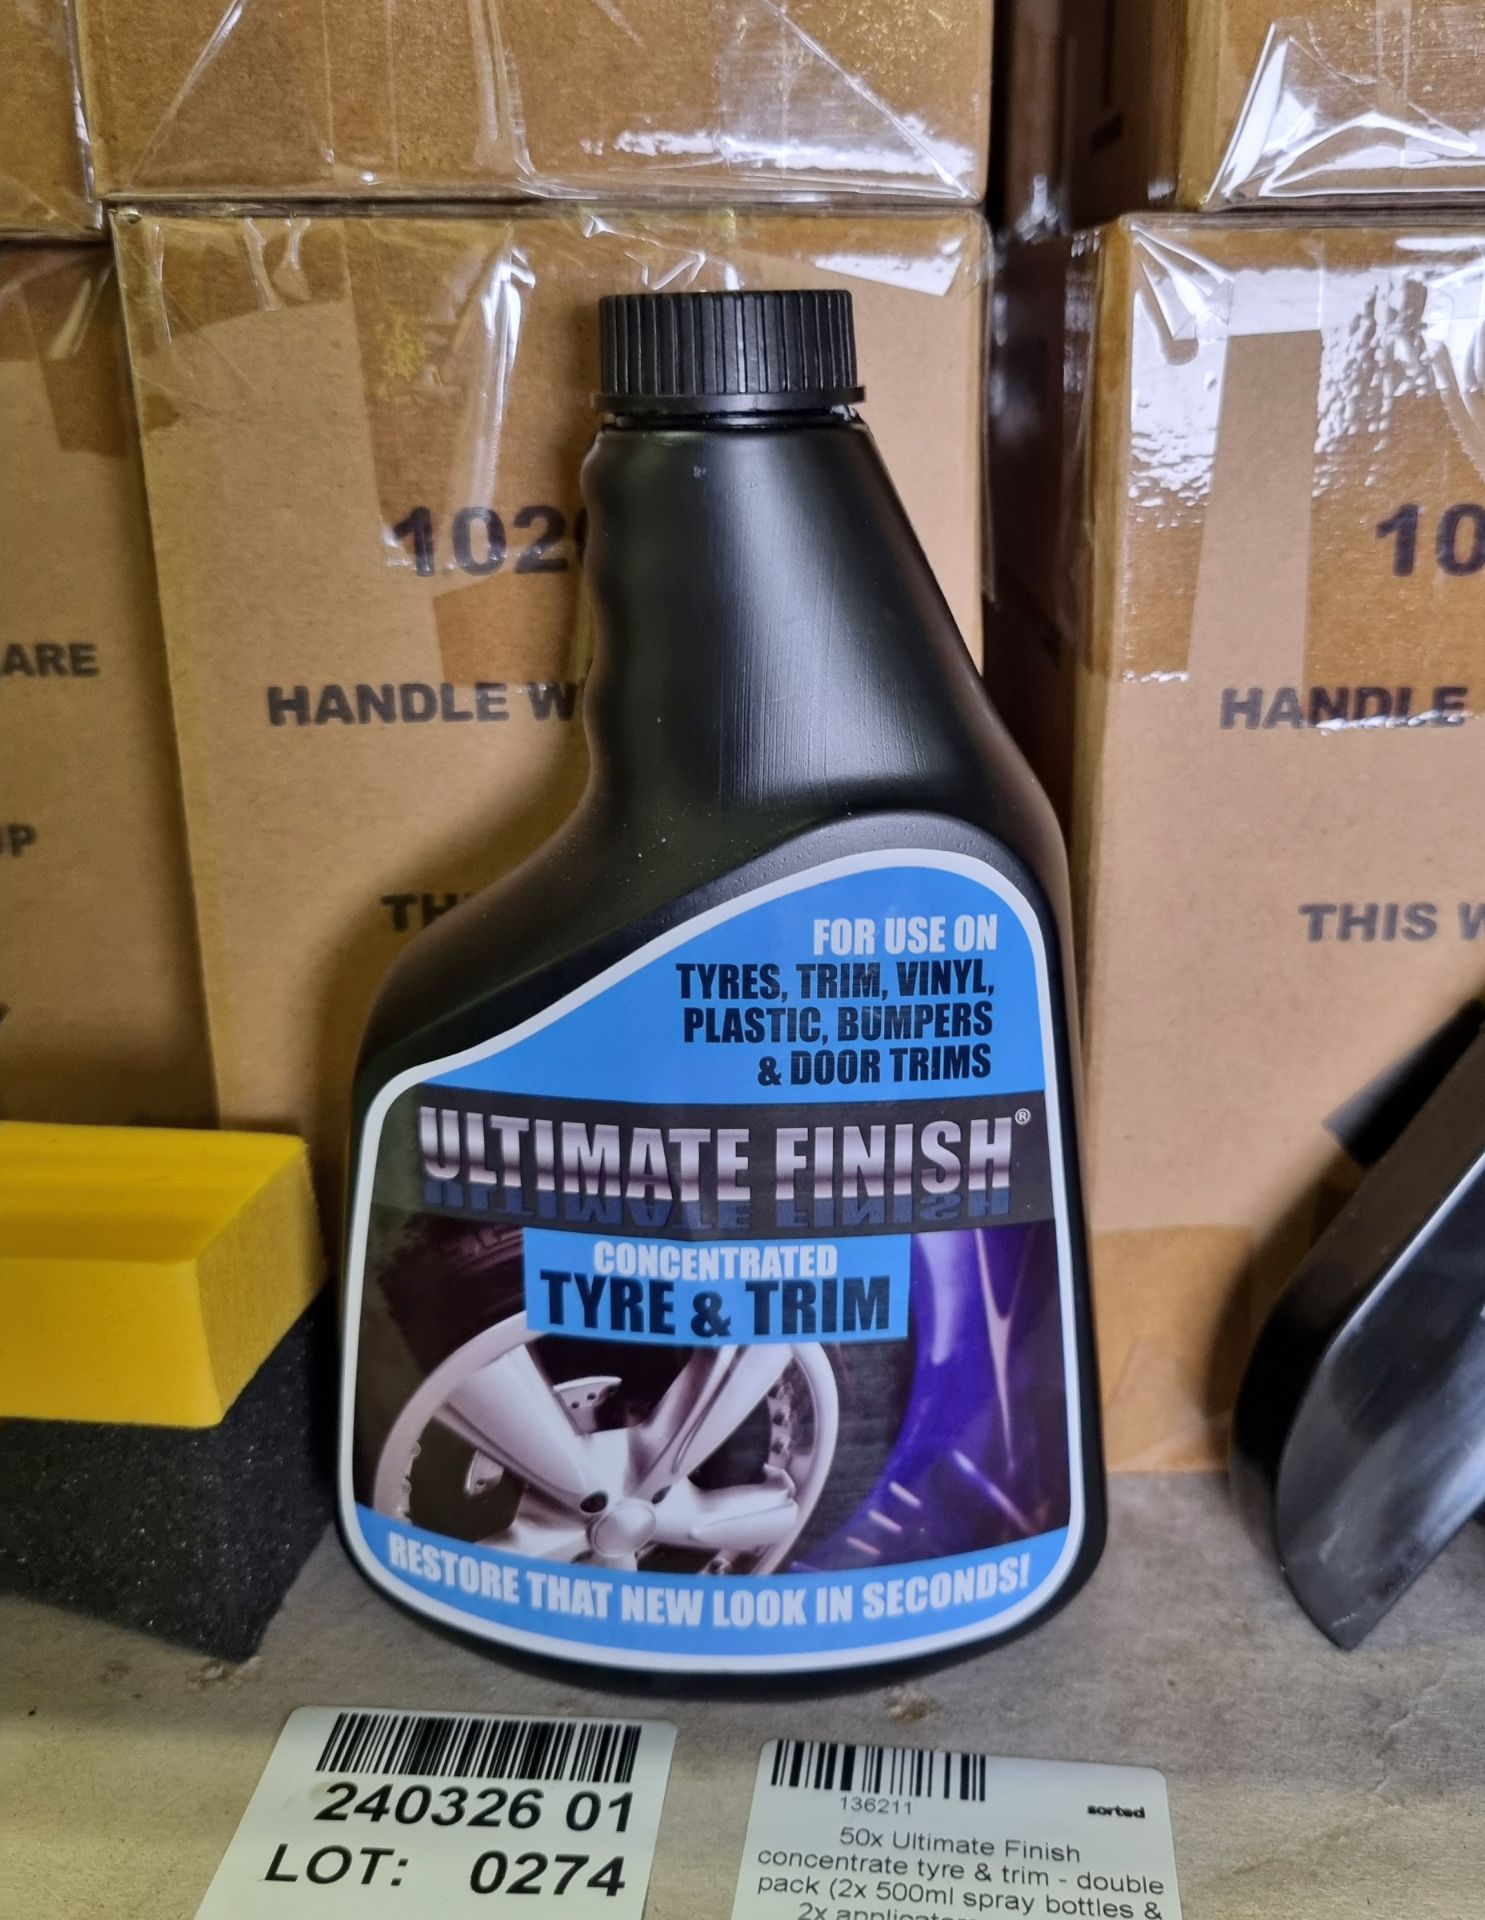 50x Ultimate Finish concentrate tyre & trim - double packs - 2x 500ml spray bottles & 2x applicators - Image 3 of 5